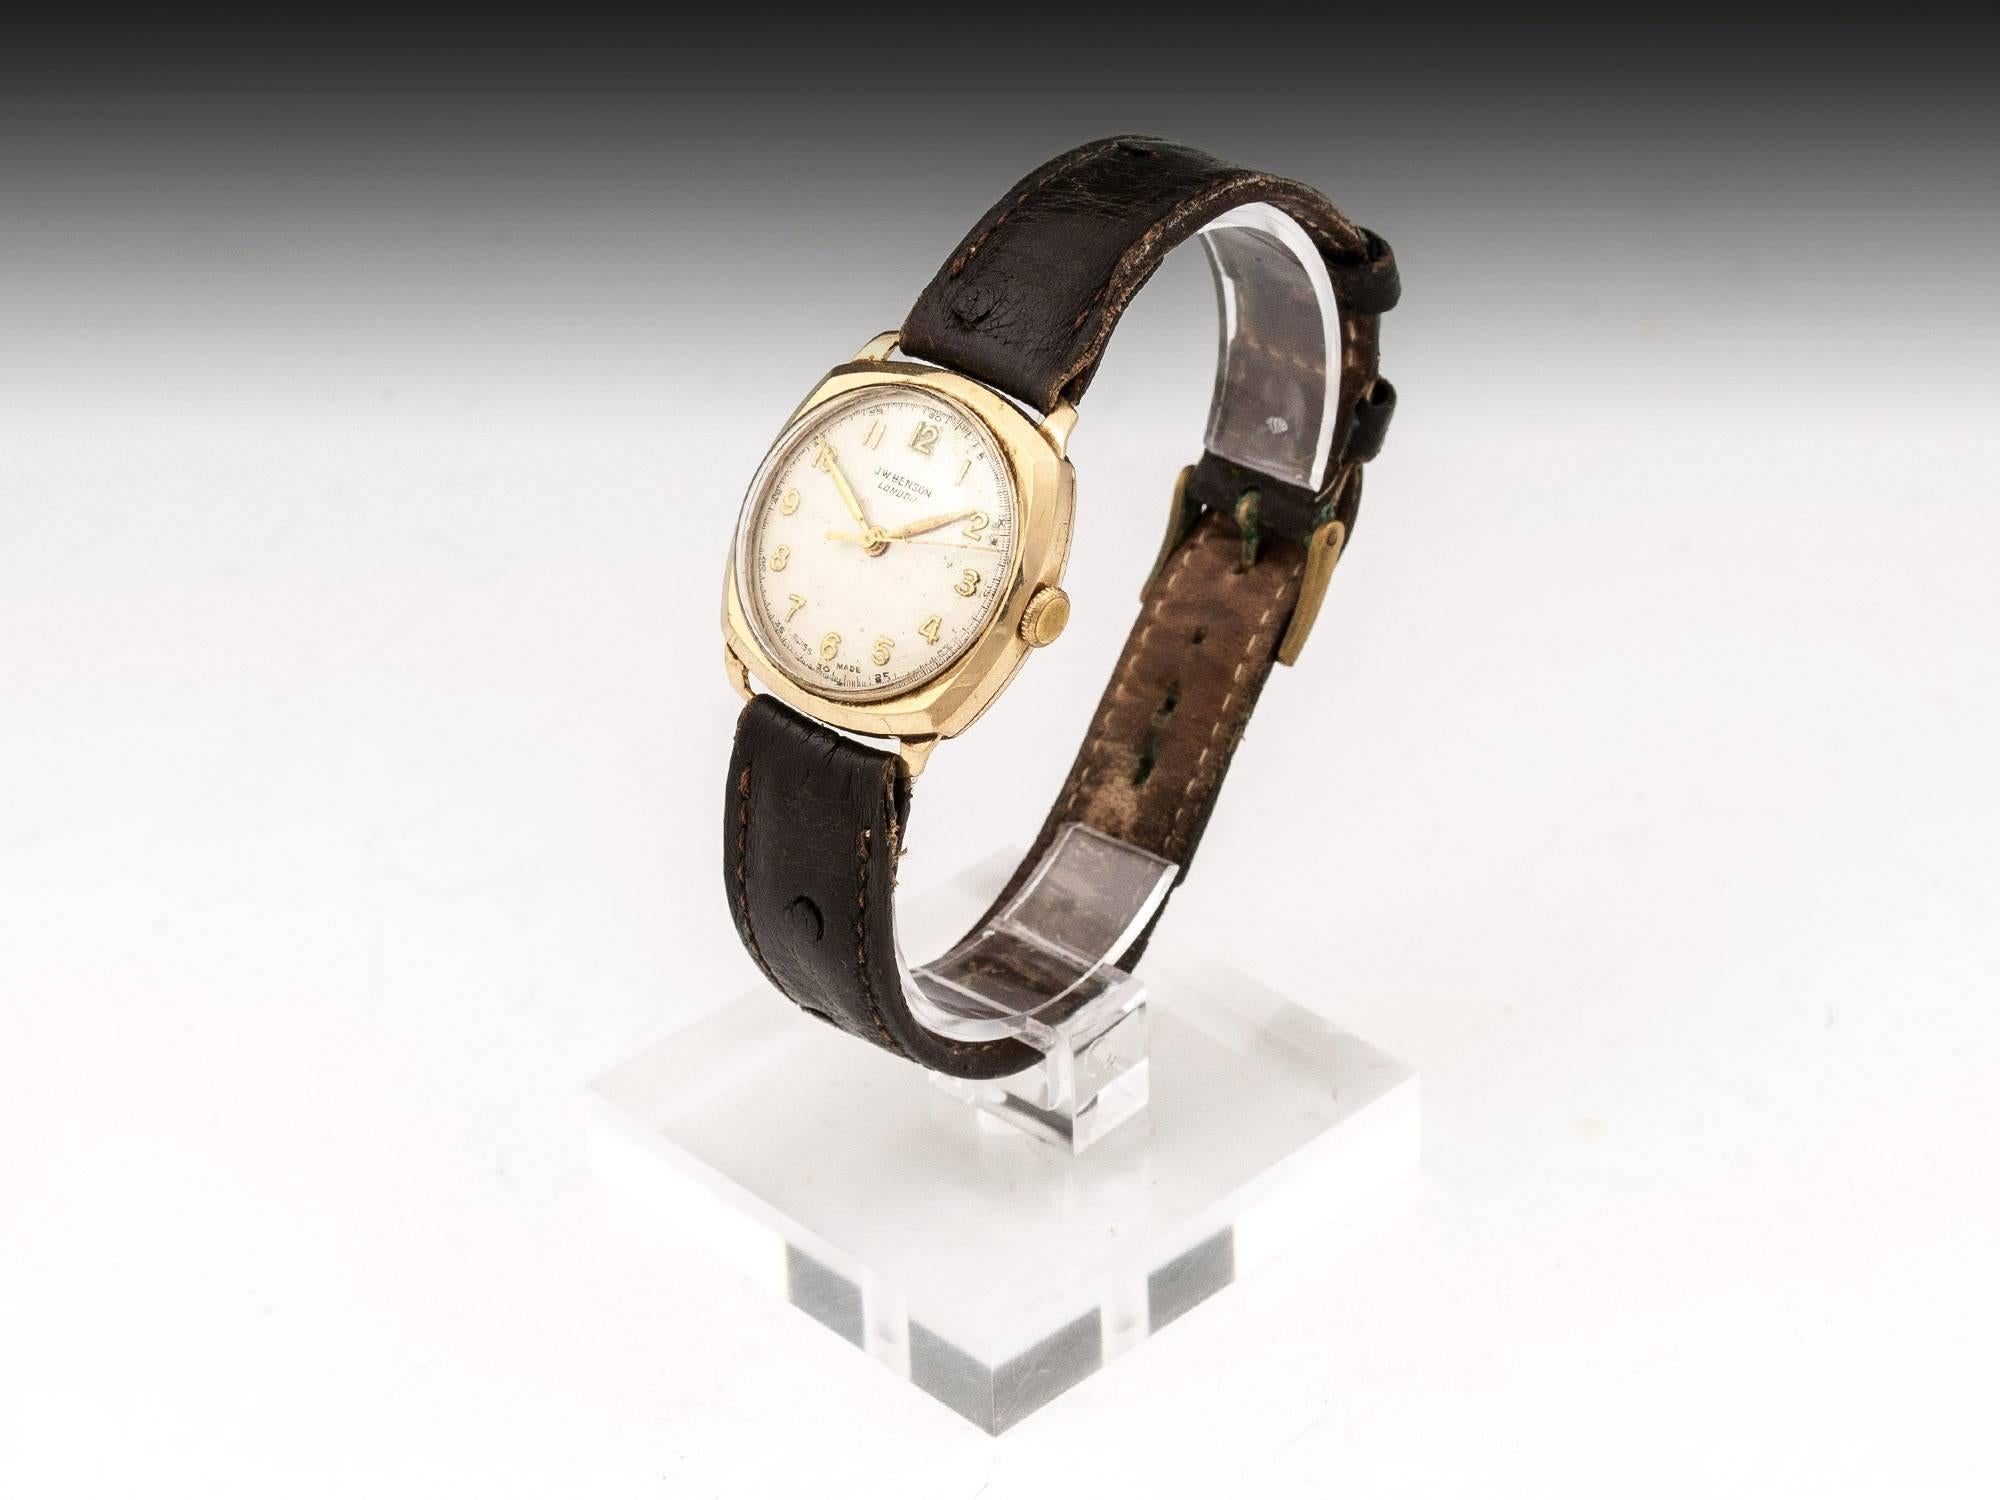 19-Carat Gold Wrist Watch by J. W. Benson 20th Century In Good Condition For Sale In Northampton, United Kingdom